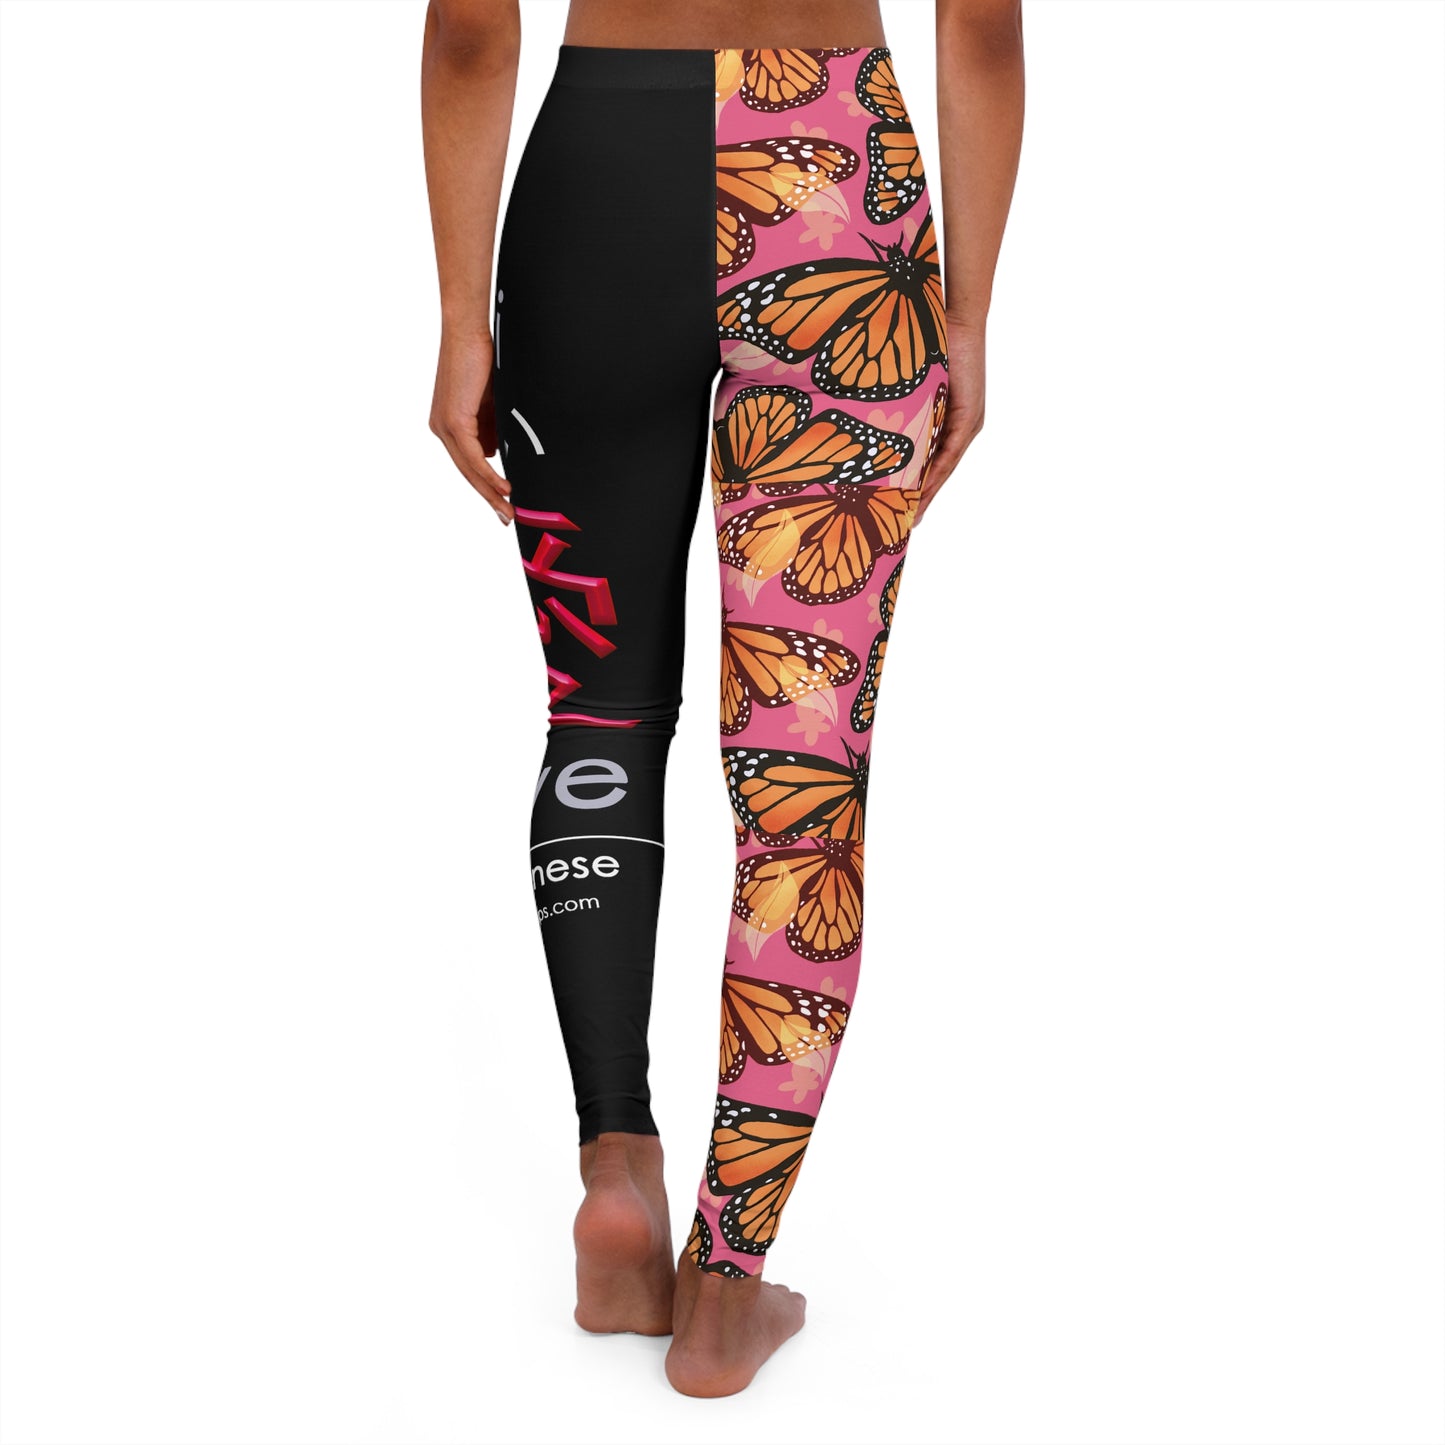 Women's Spandex Leggings, tretchy fabric that provides the perfect fit, Athleisure comfy and fun